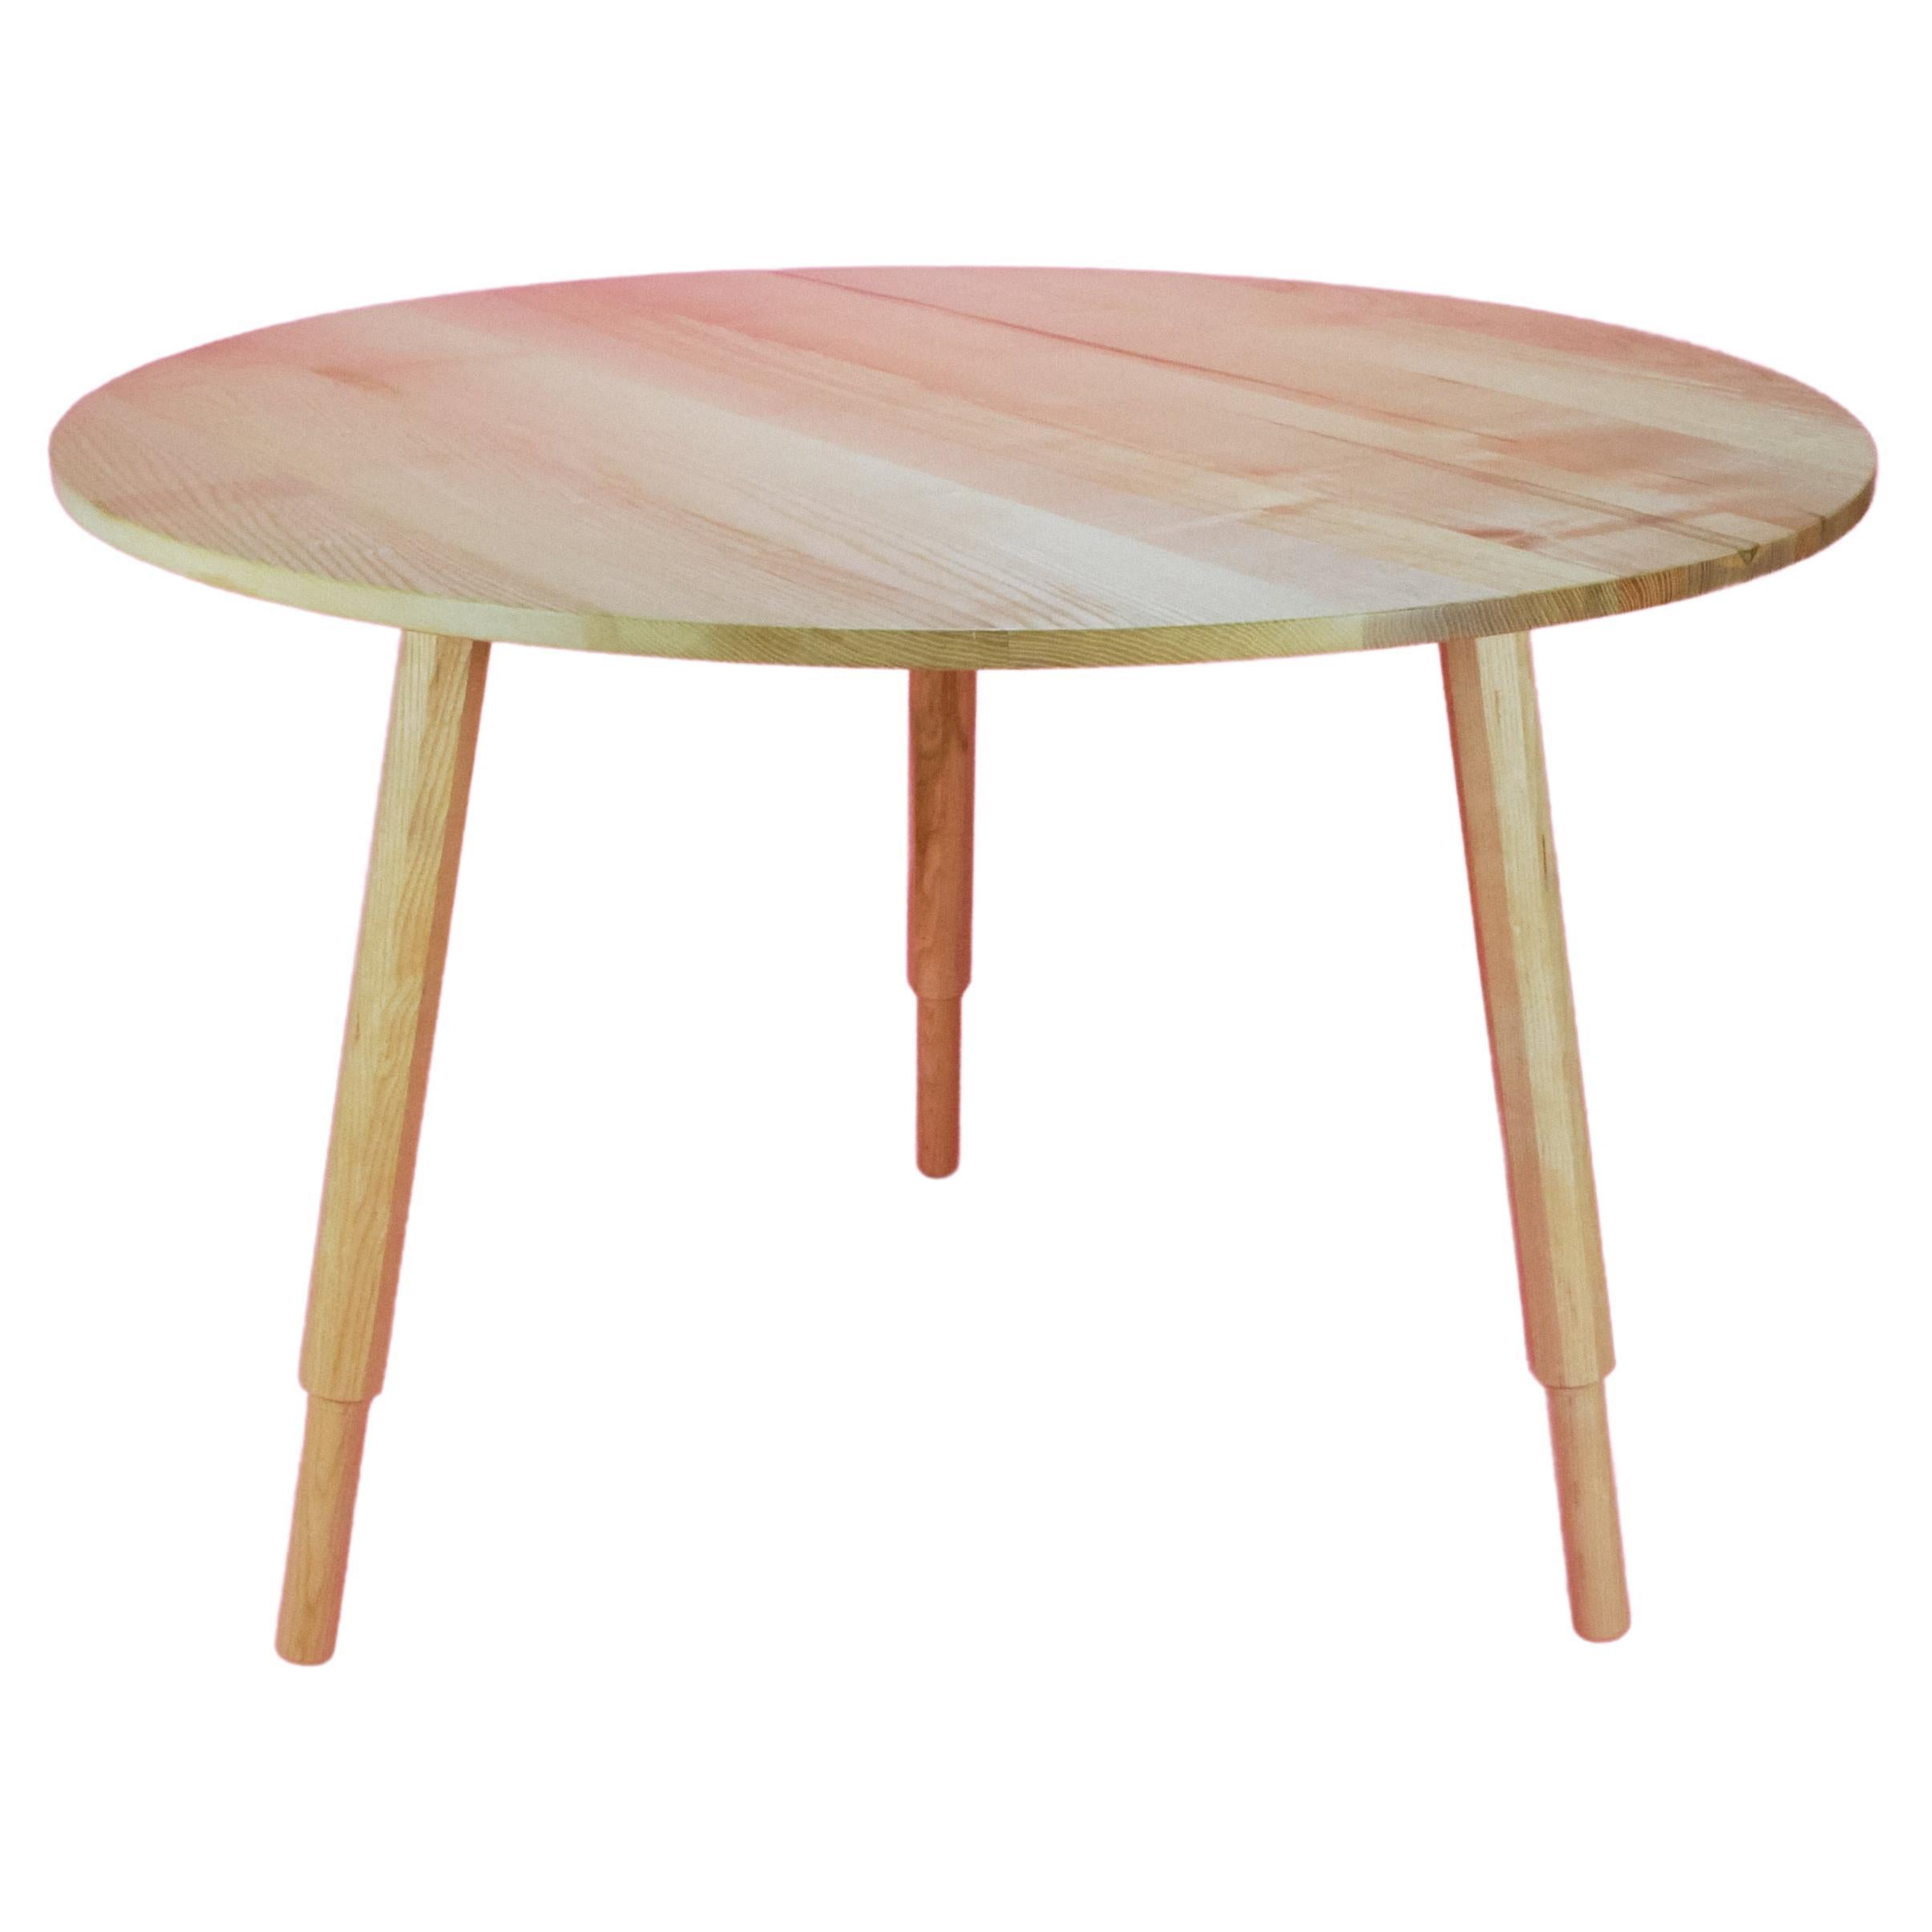 Round Dining Table with Screw in Legs Solid English Ash Wood Handmade in the UK For Sale